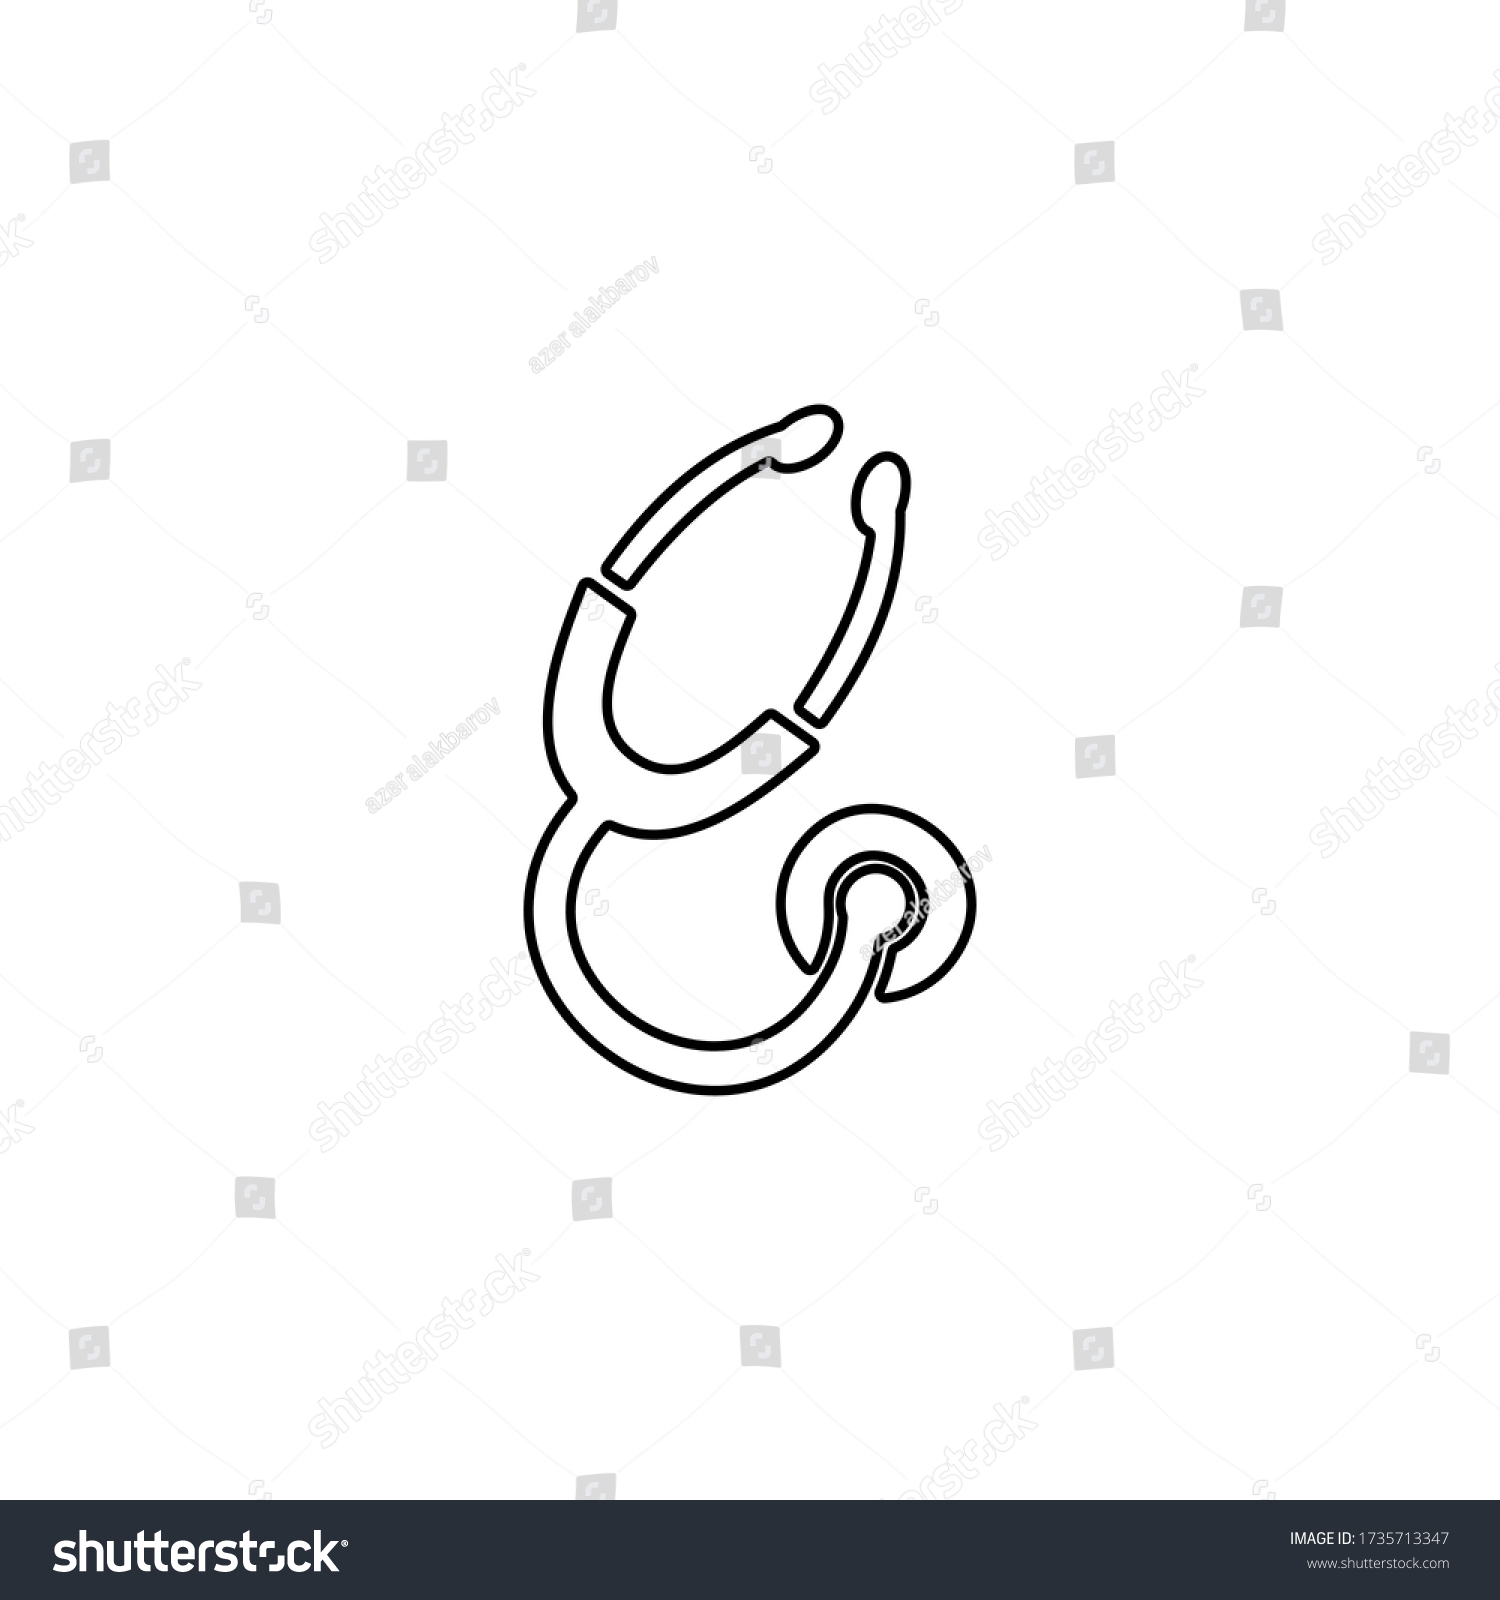 SVG of Stethoscope symbol. Listening heartbeat. Heart rate measurement. Line icon design for health care concept. svg